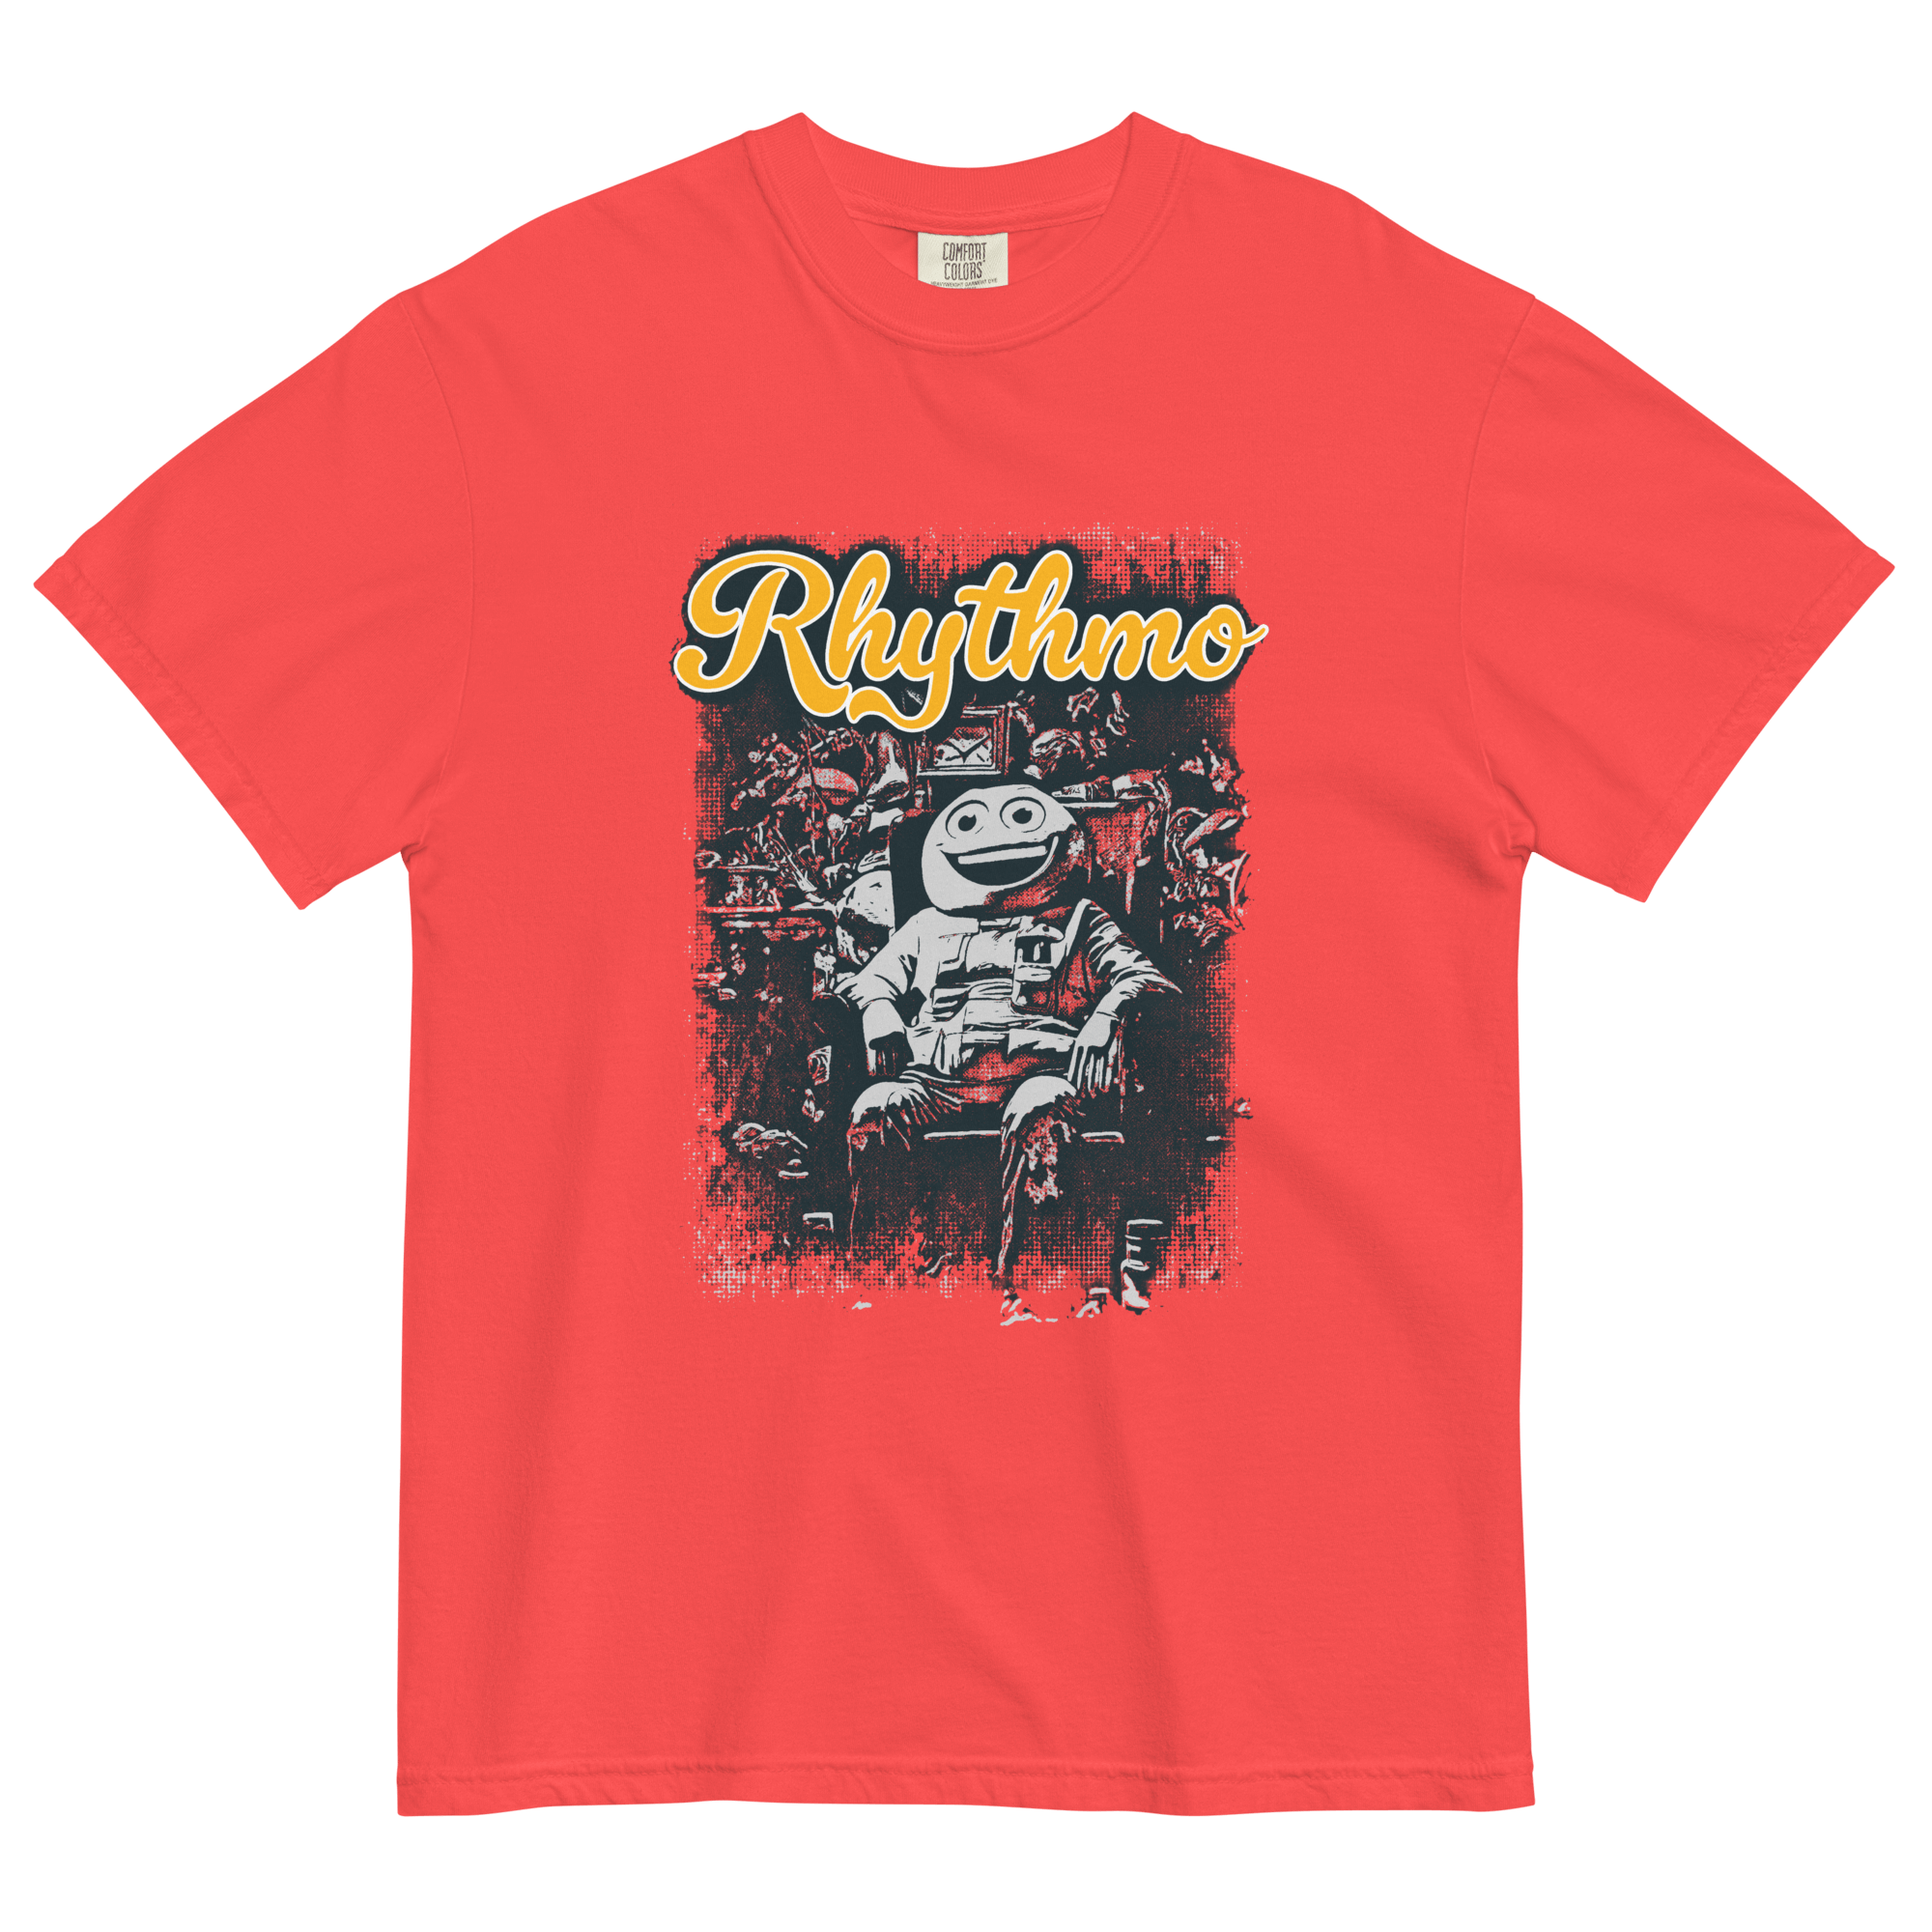 Rhythmo T-shirtRock the retro vibe with the Rhythmo T-shirt! Top-notch cotton comfort meets 70's vintage chic. Snag your streetwear staple now! • 100% ring-spun cotton • Fabric weight: 6.1 oz/yd² (206.8 g/m²) • Garment-dyed • Relaxed fit • 7/8″ double-nee